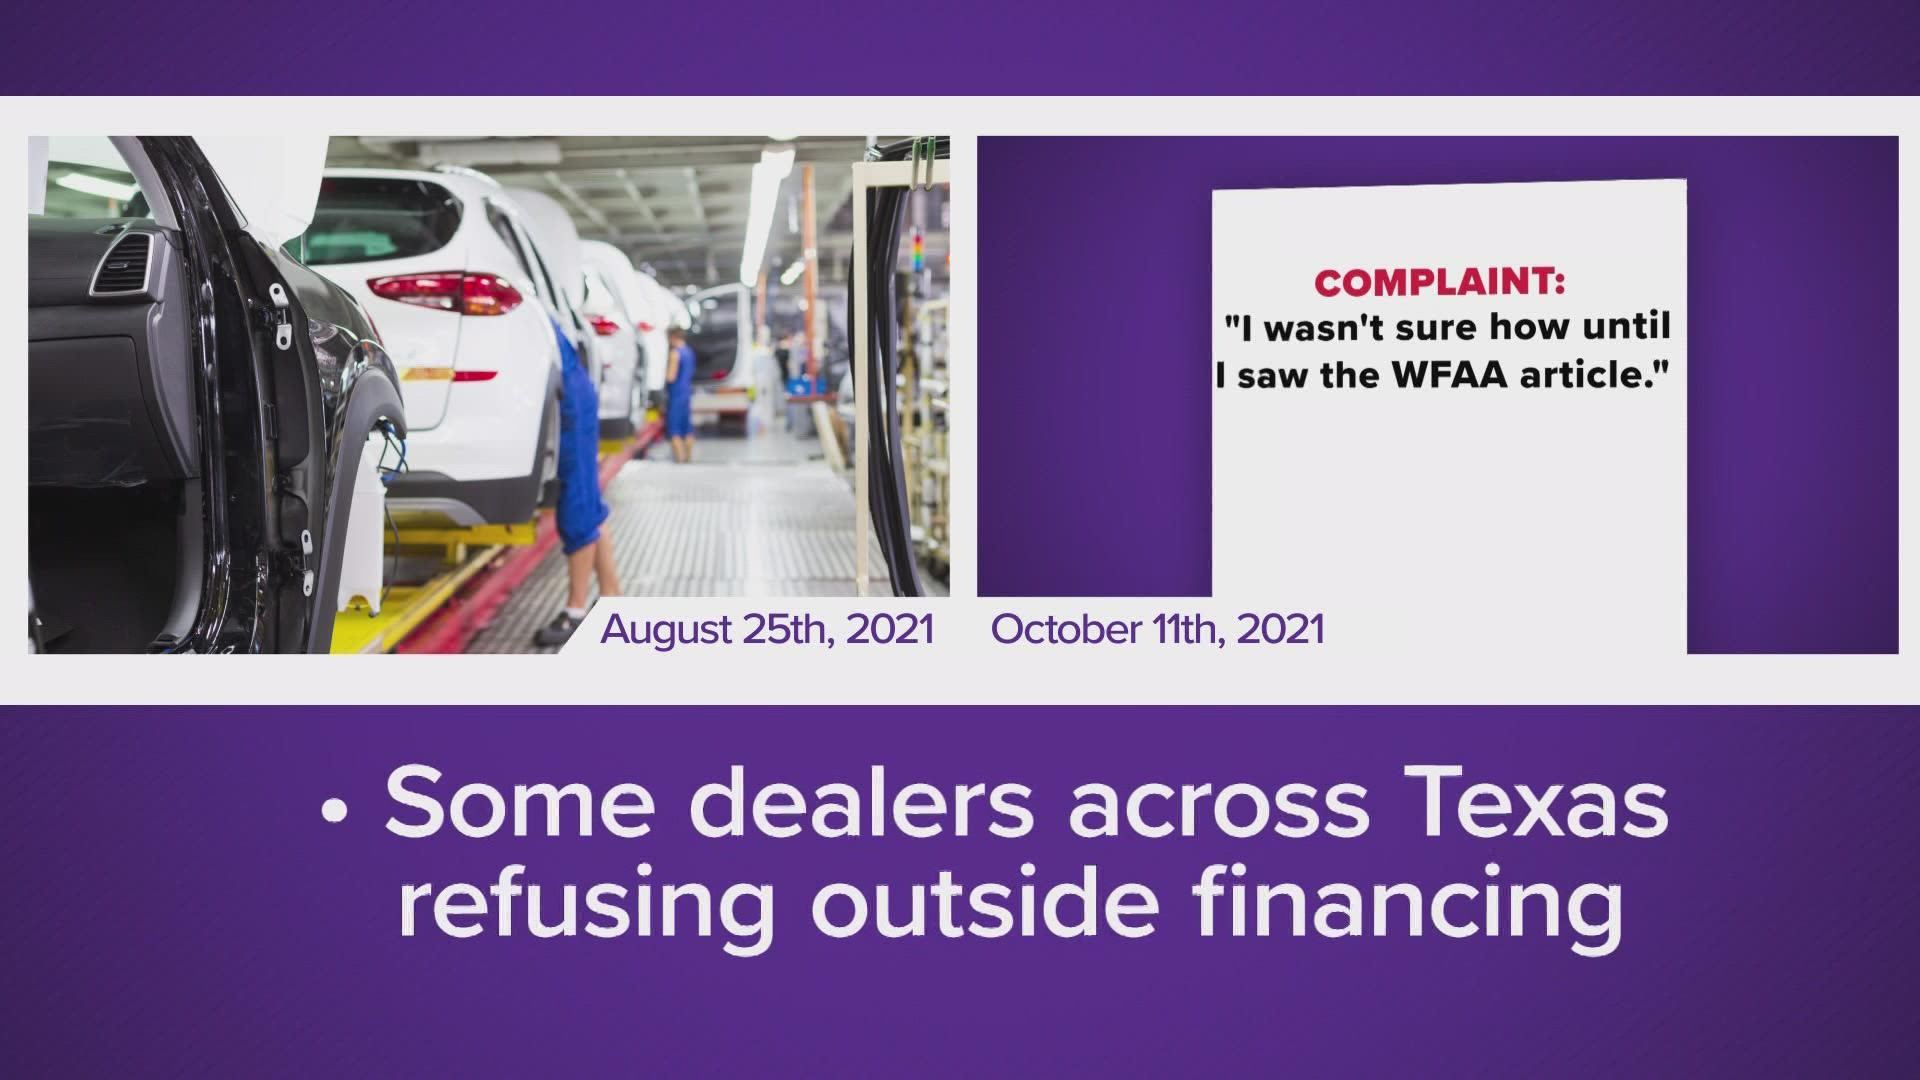 The association representing Texas credit unions sounds off, promising more action following WFAA reports on Texas consumers being forced to use car dealer lenders.